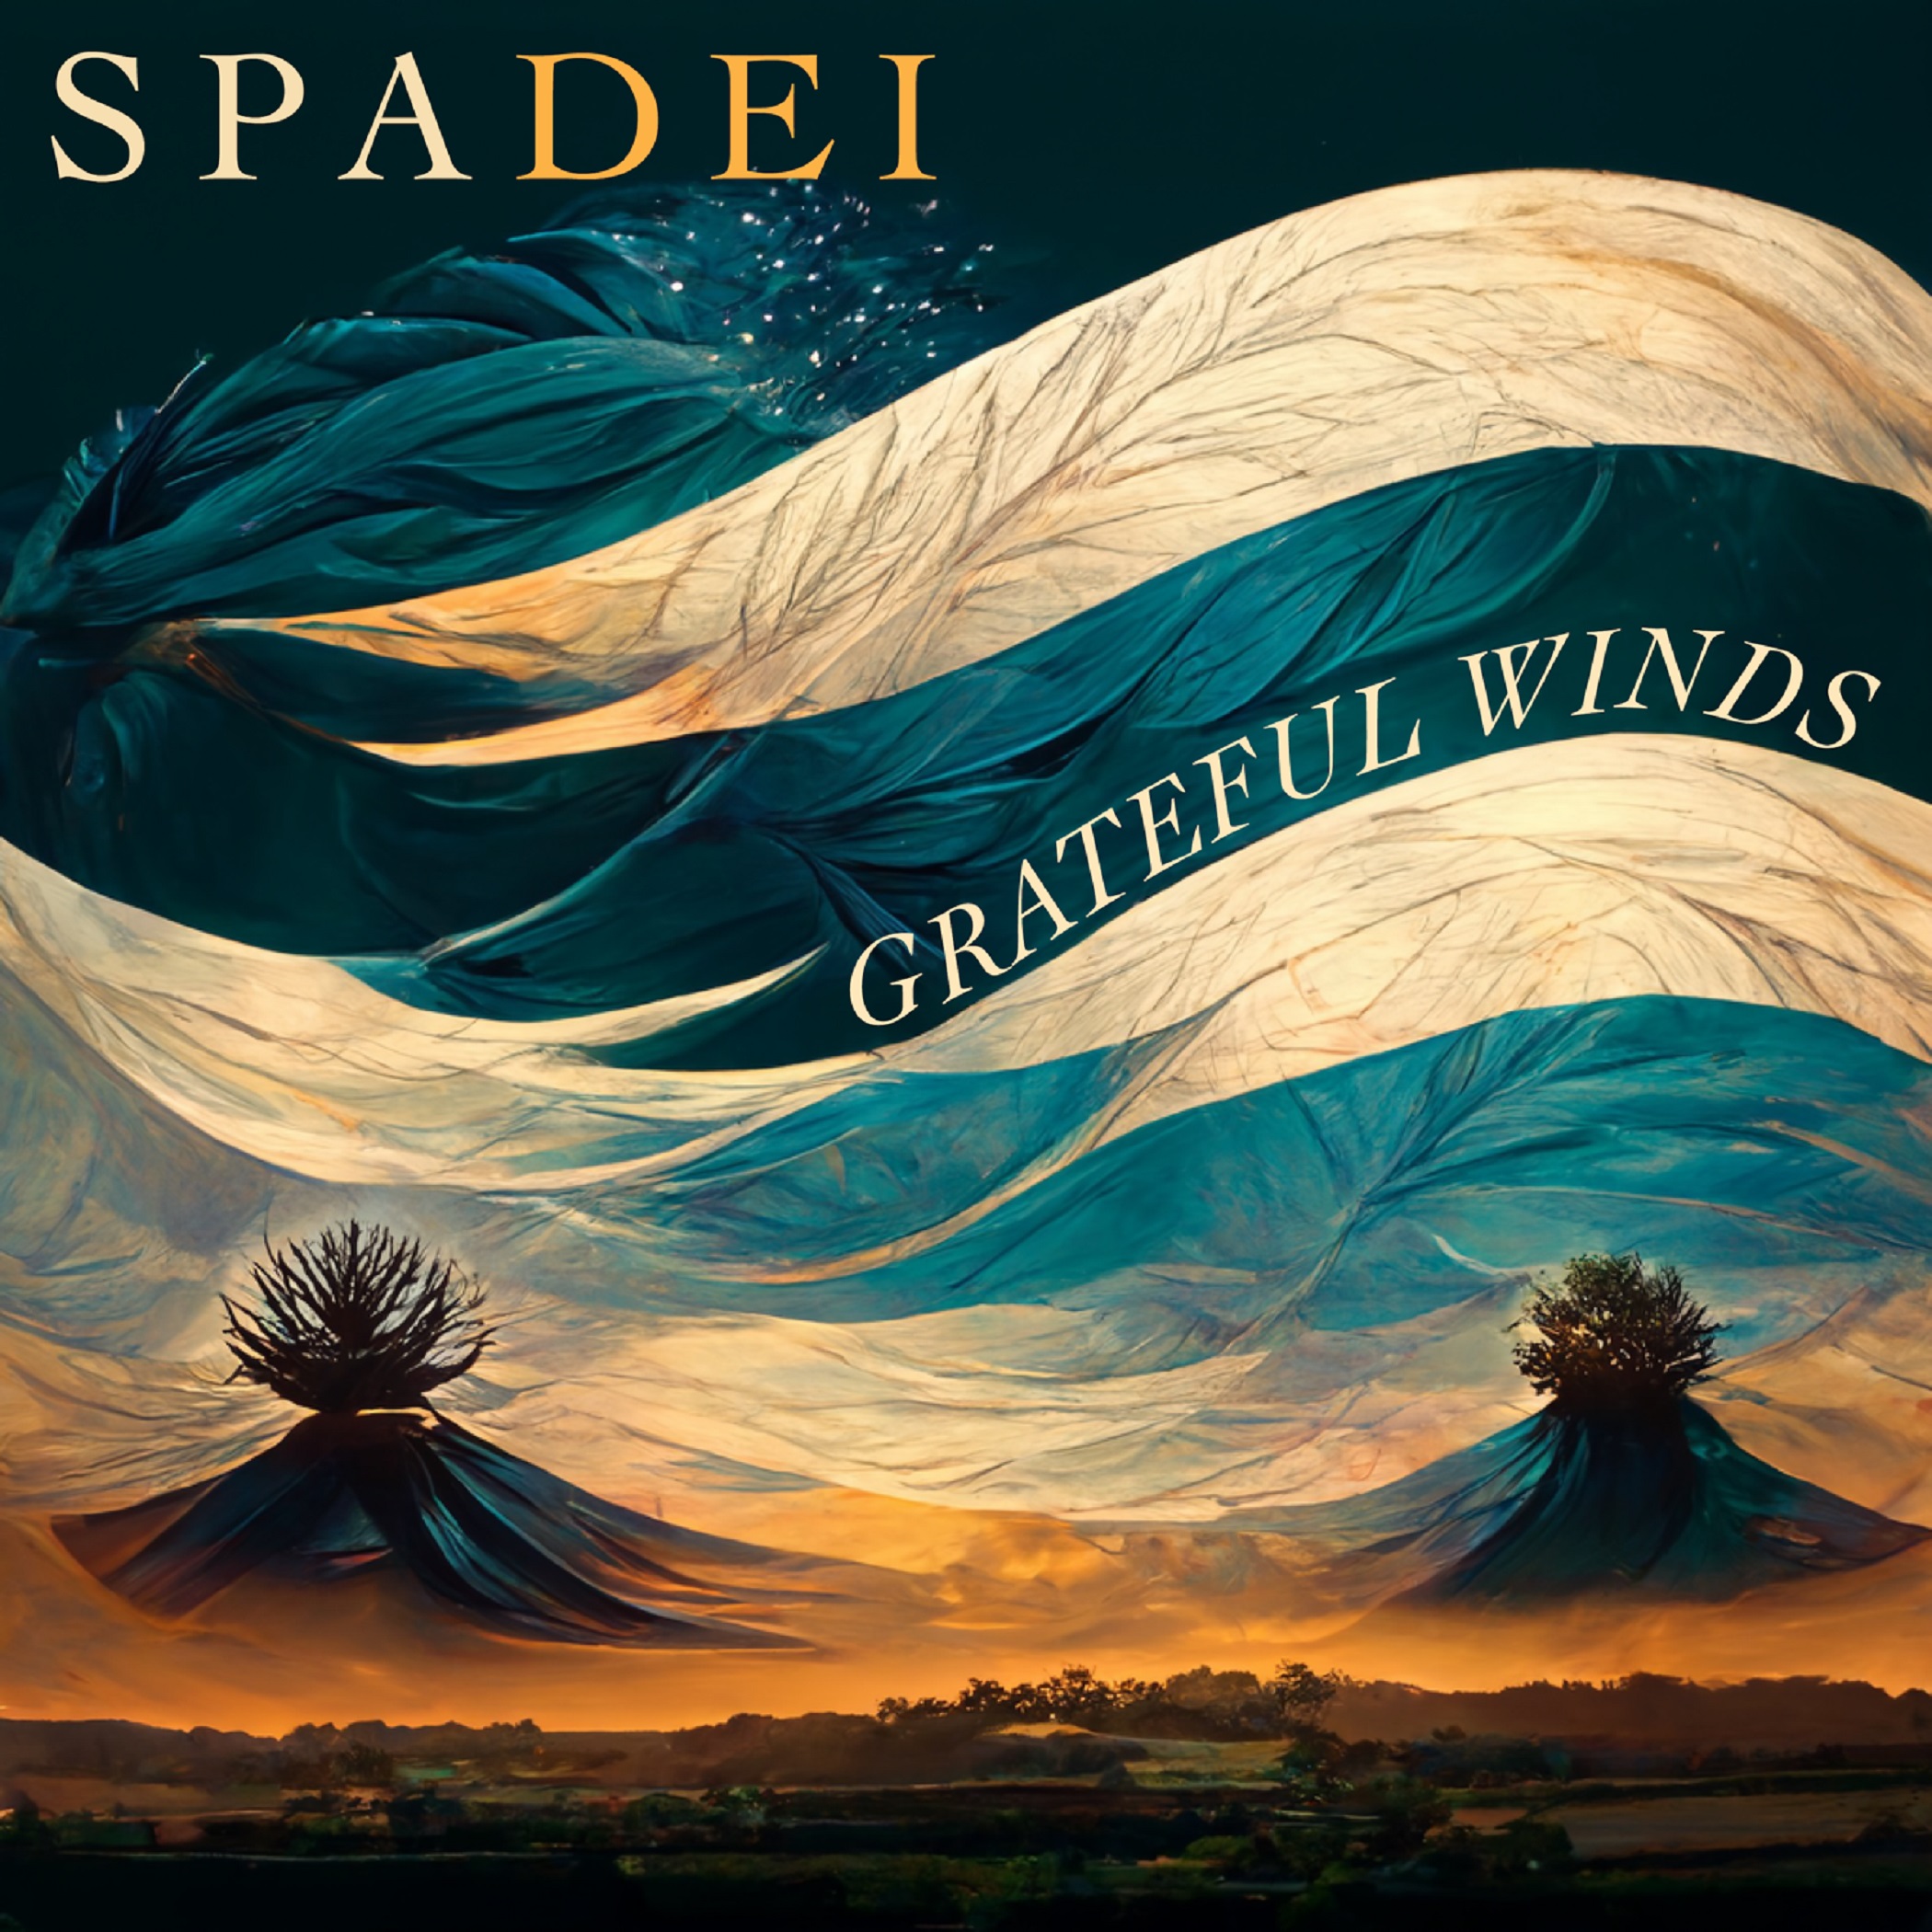 Spadei Creates Lush Soundscapes On Their Debut Album & First Single “Grateful Winds”